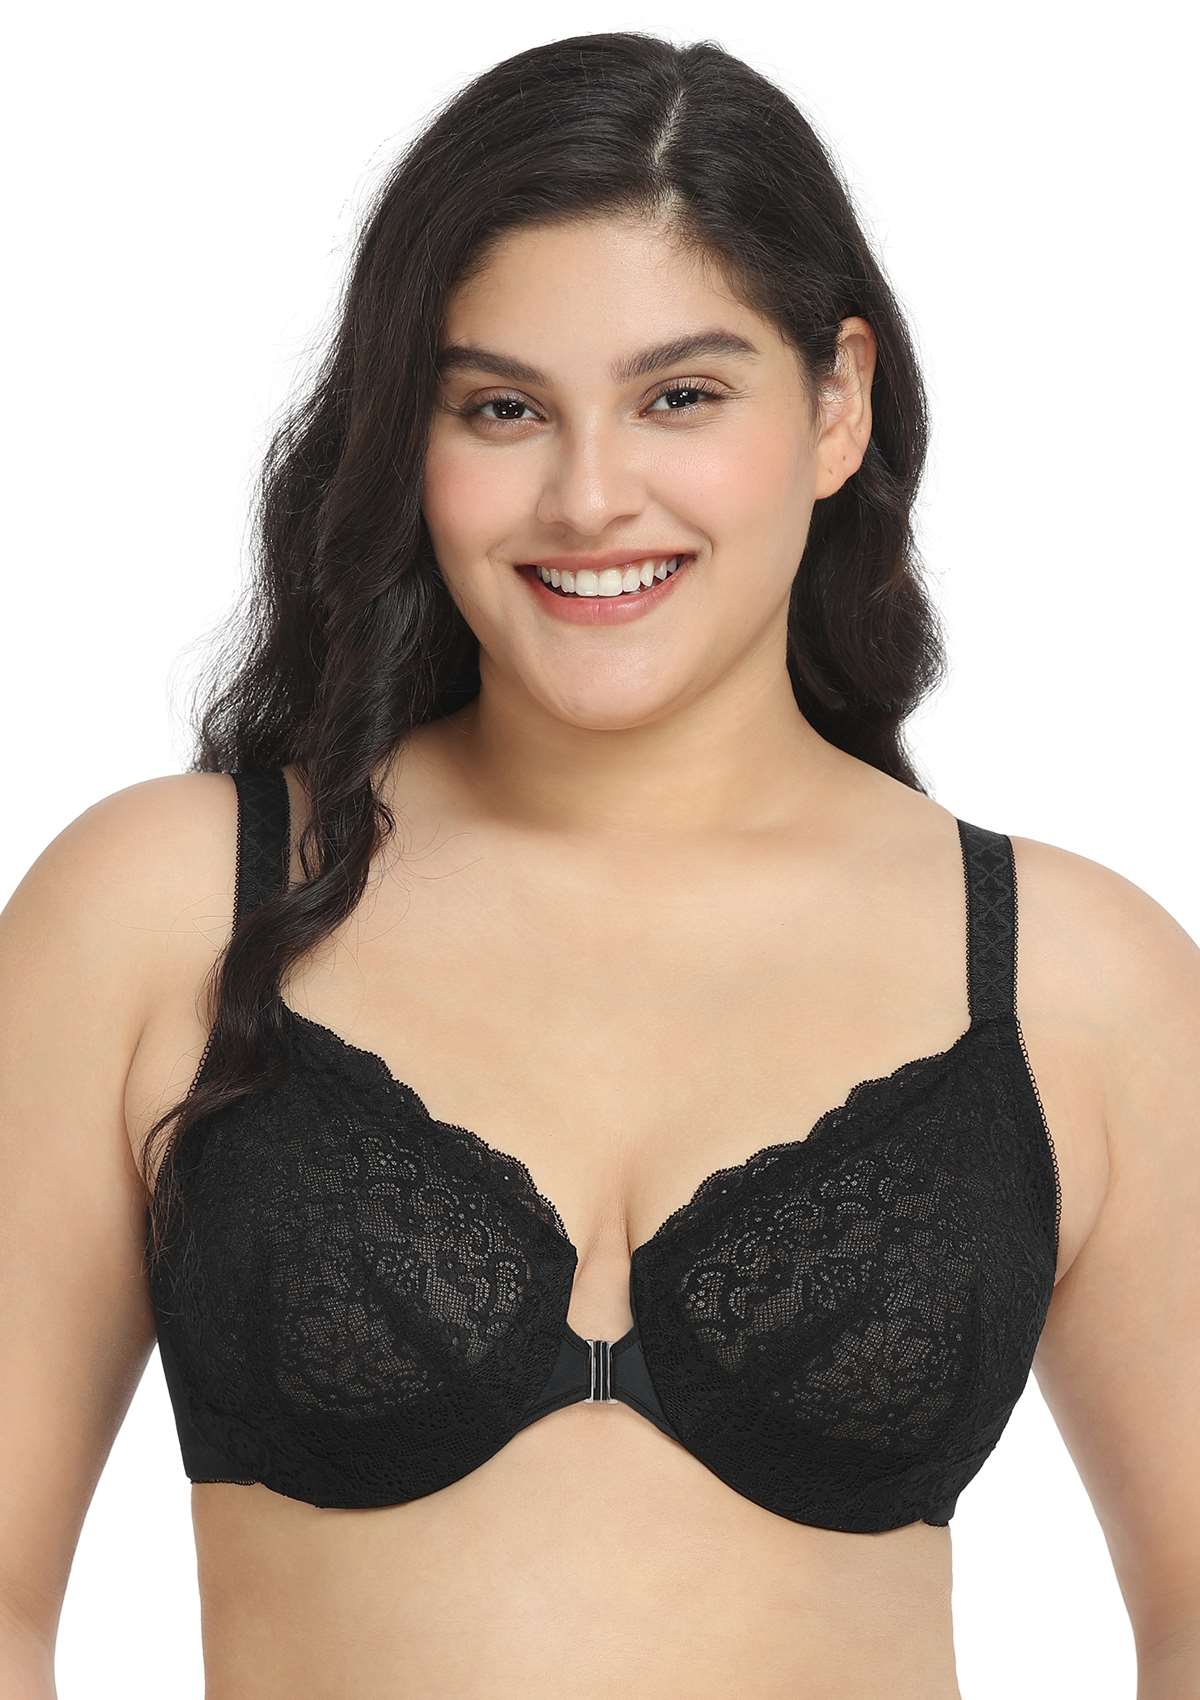 HSIA Nymphaea Front-Close Unlined Retro Floral Lace Back Smoothing Bra - Black / 38 / D